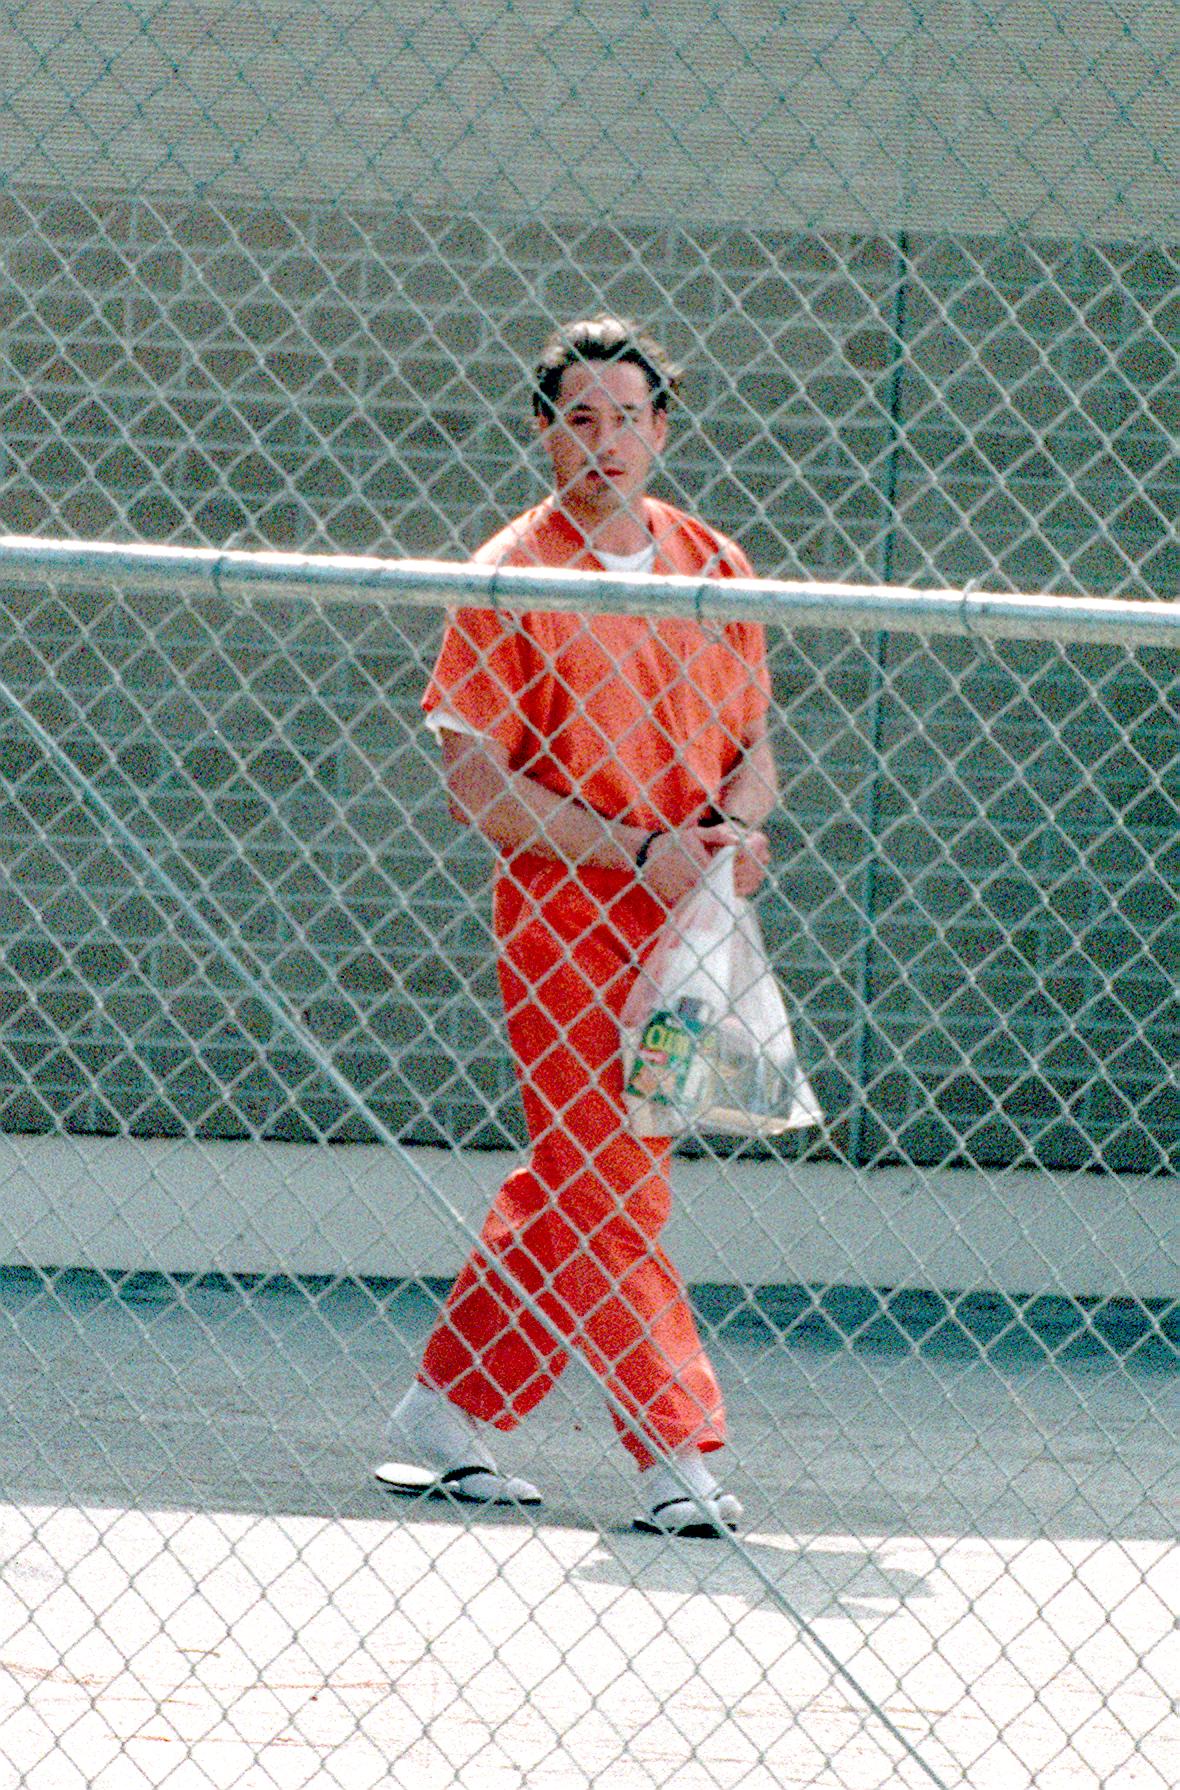 Robert Downey Jr. on his way to a prison bus after a hearing in Malibu, California on August 5, 1999 | Source: Getty Images